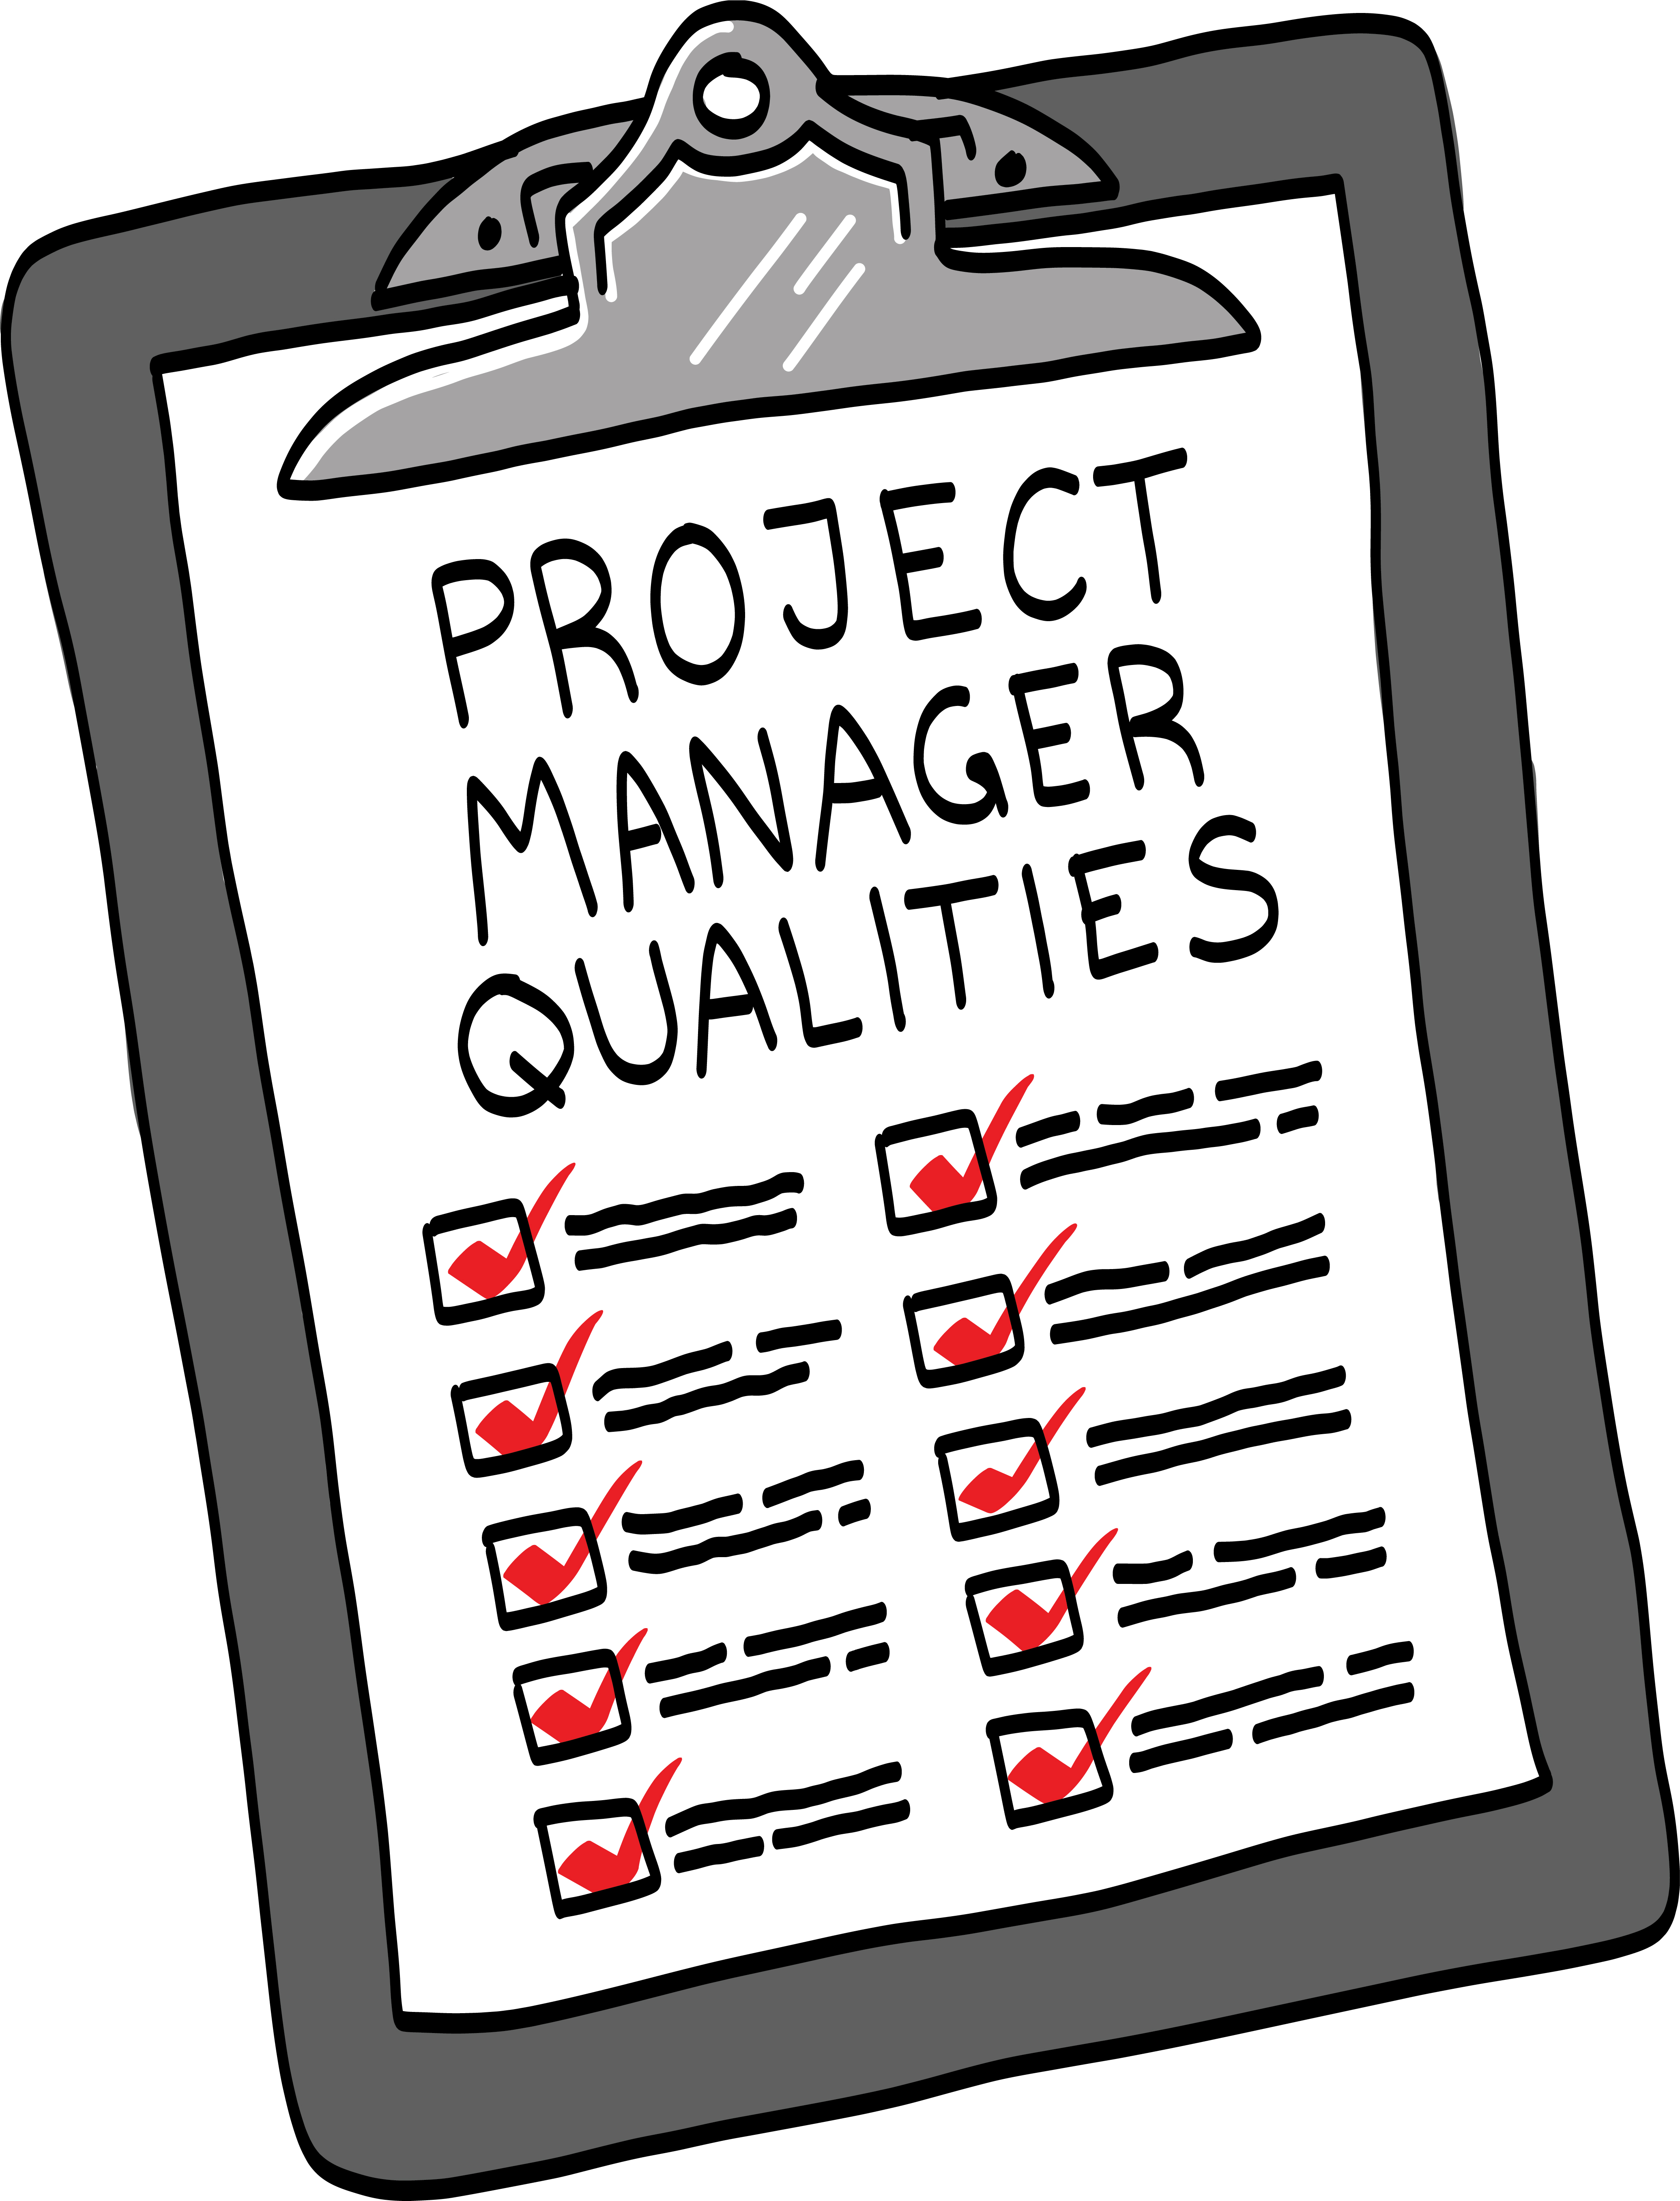 How to be The Best Project Manager 40931 - How to be The Best Project Manager?